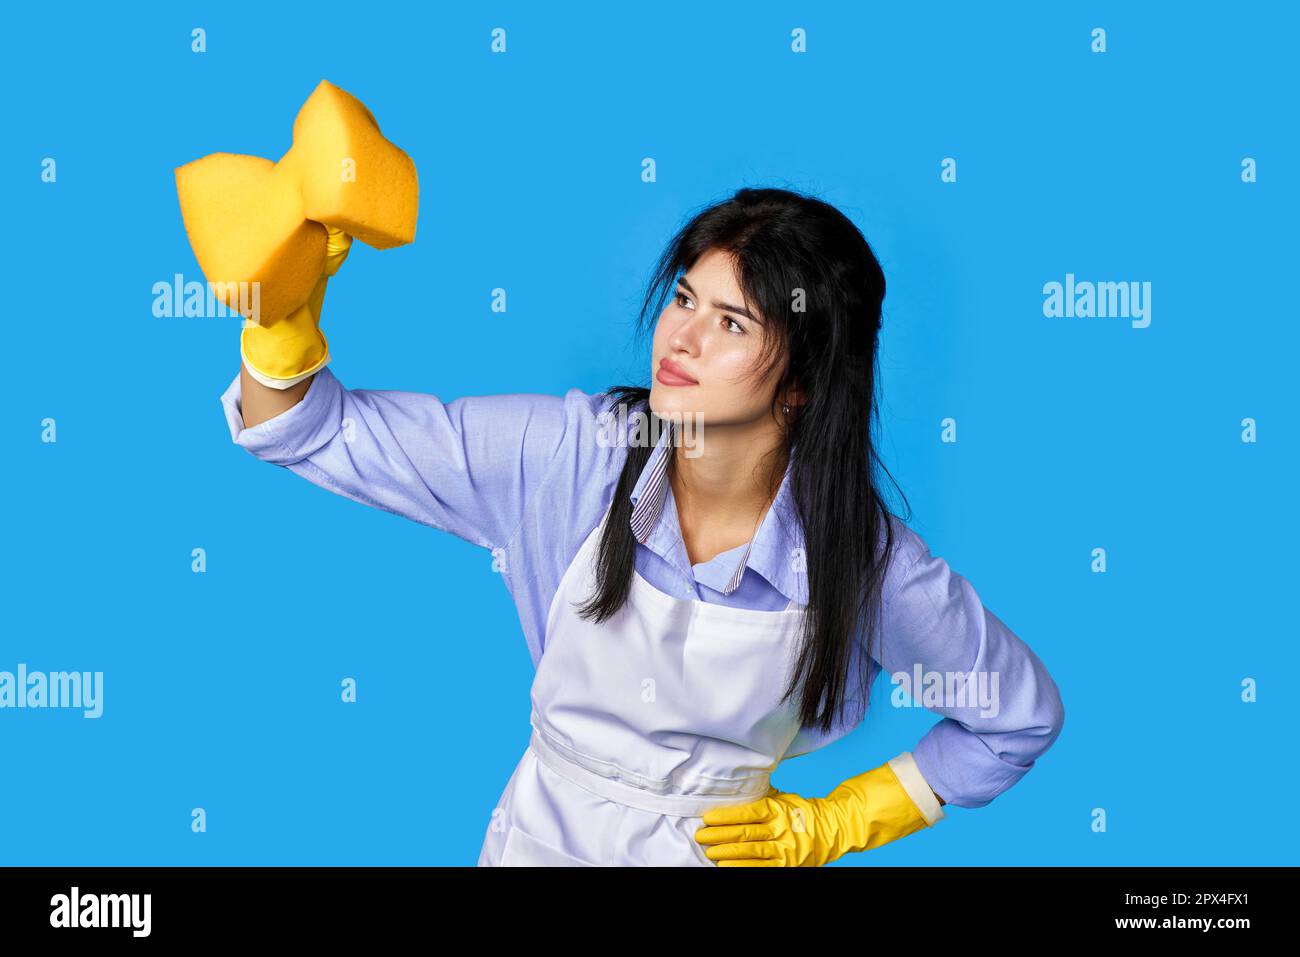 https://c8.alamy.com/comp/2PX4FX1/diligent-woman-in-rubber-gloves-and-cleaner-apron-cleaning-with-yellow-sponge-on-blue-background-2PX4FX1.jpg